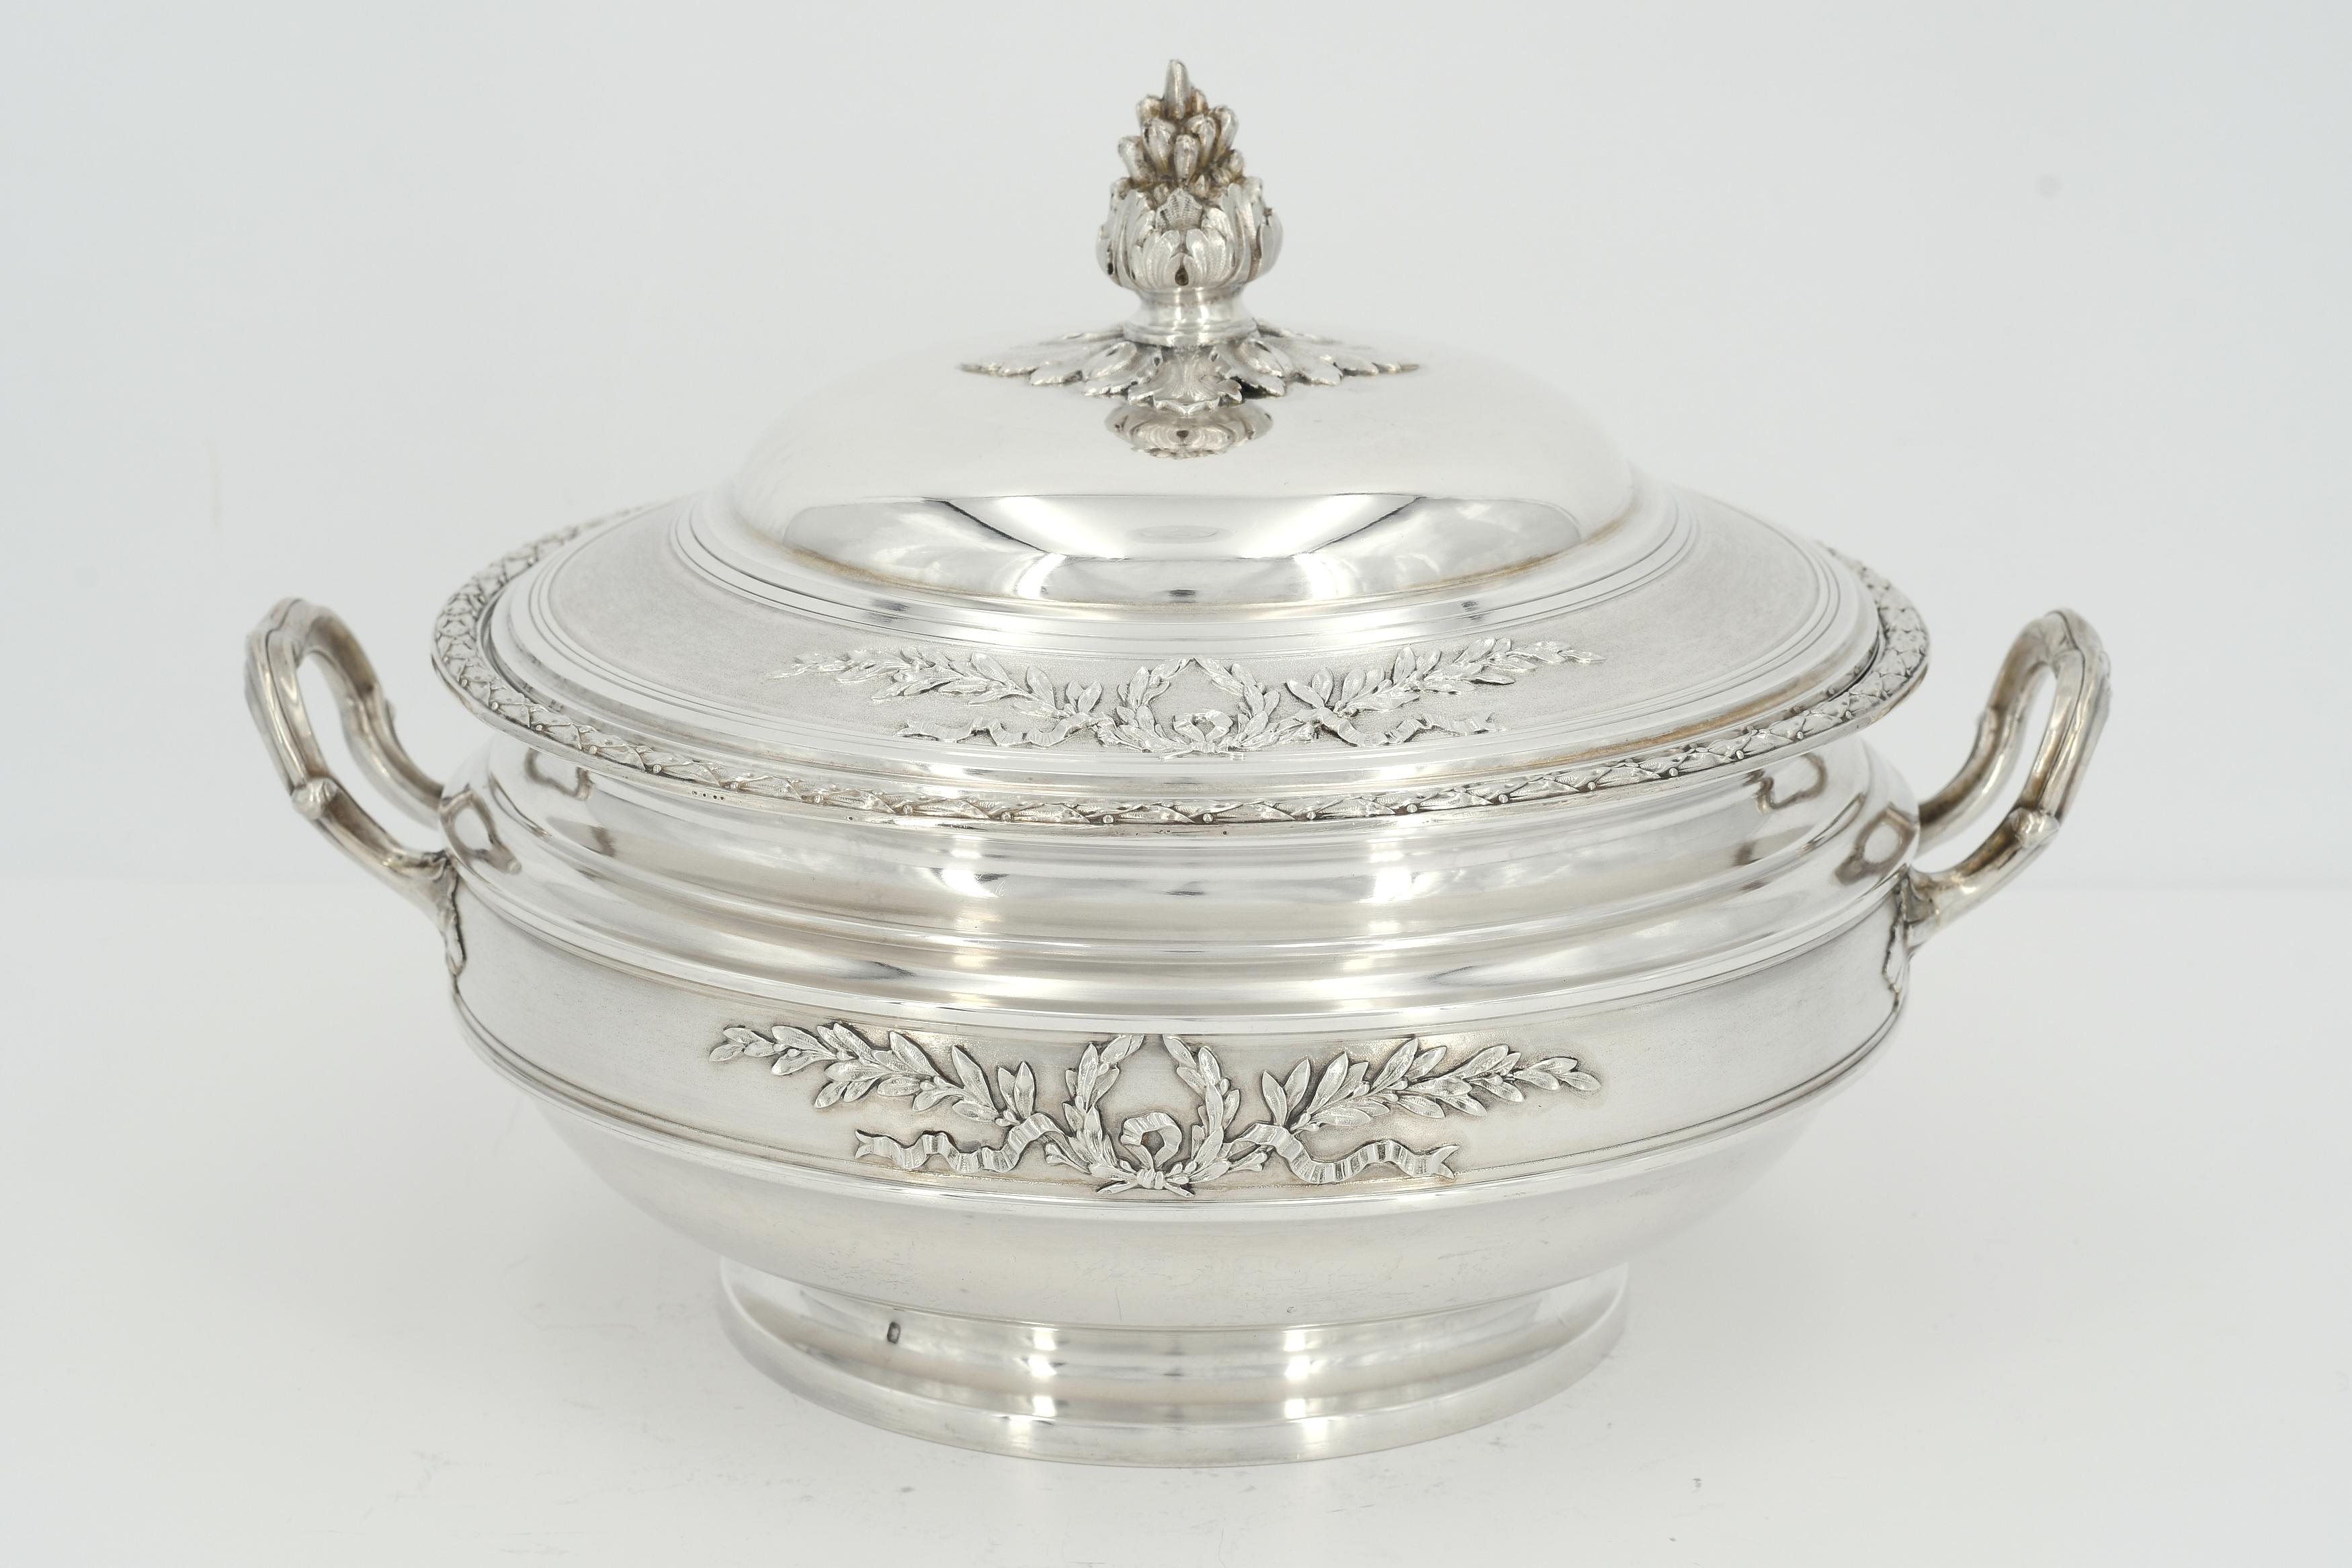 Silver vegetable bowl with laurel wreaths and floral knob - Image 4 of 8